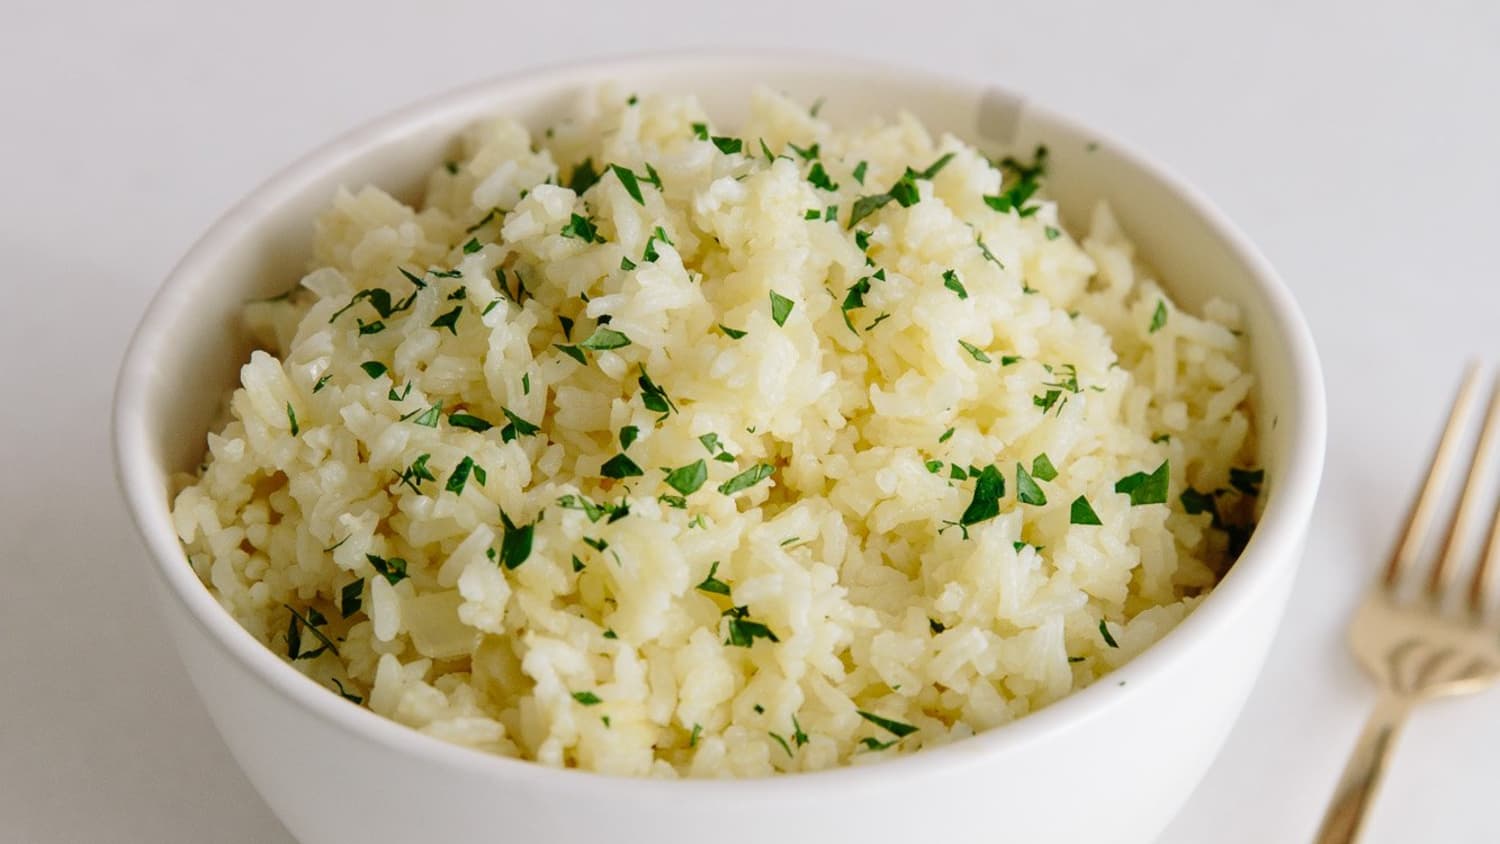 A Simple Rice Dish: A Guide To Perfection